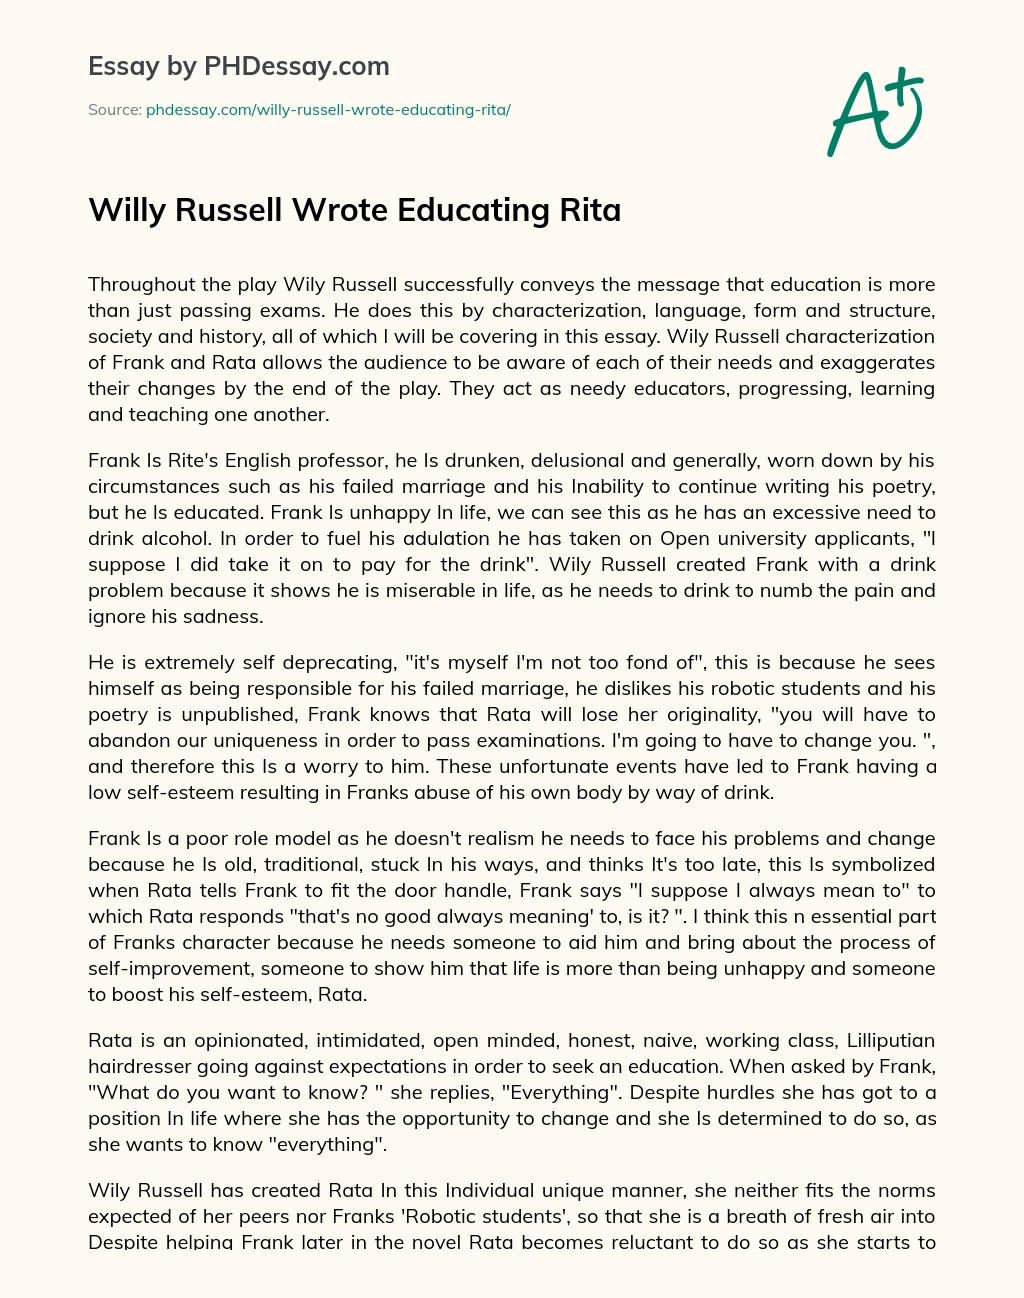 Willy Russell Wrote Educating Rita essay